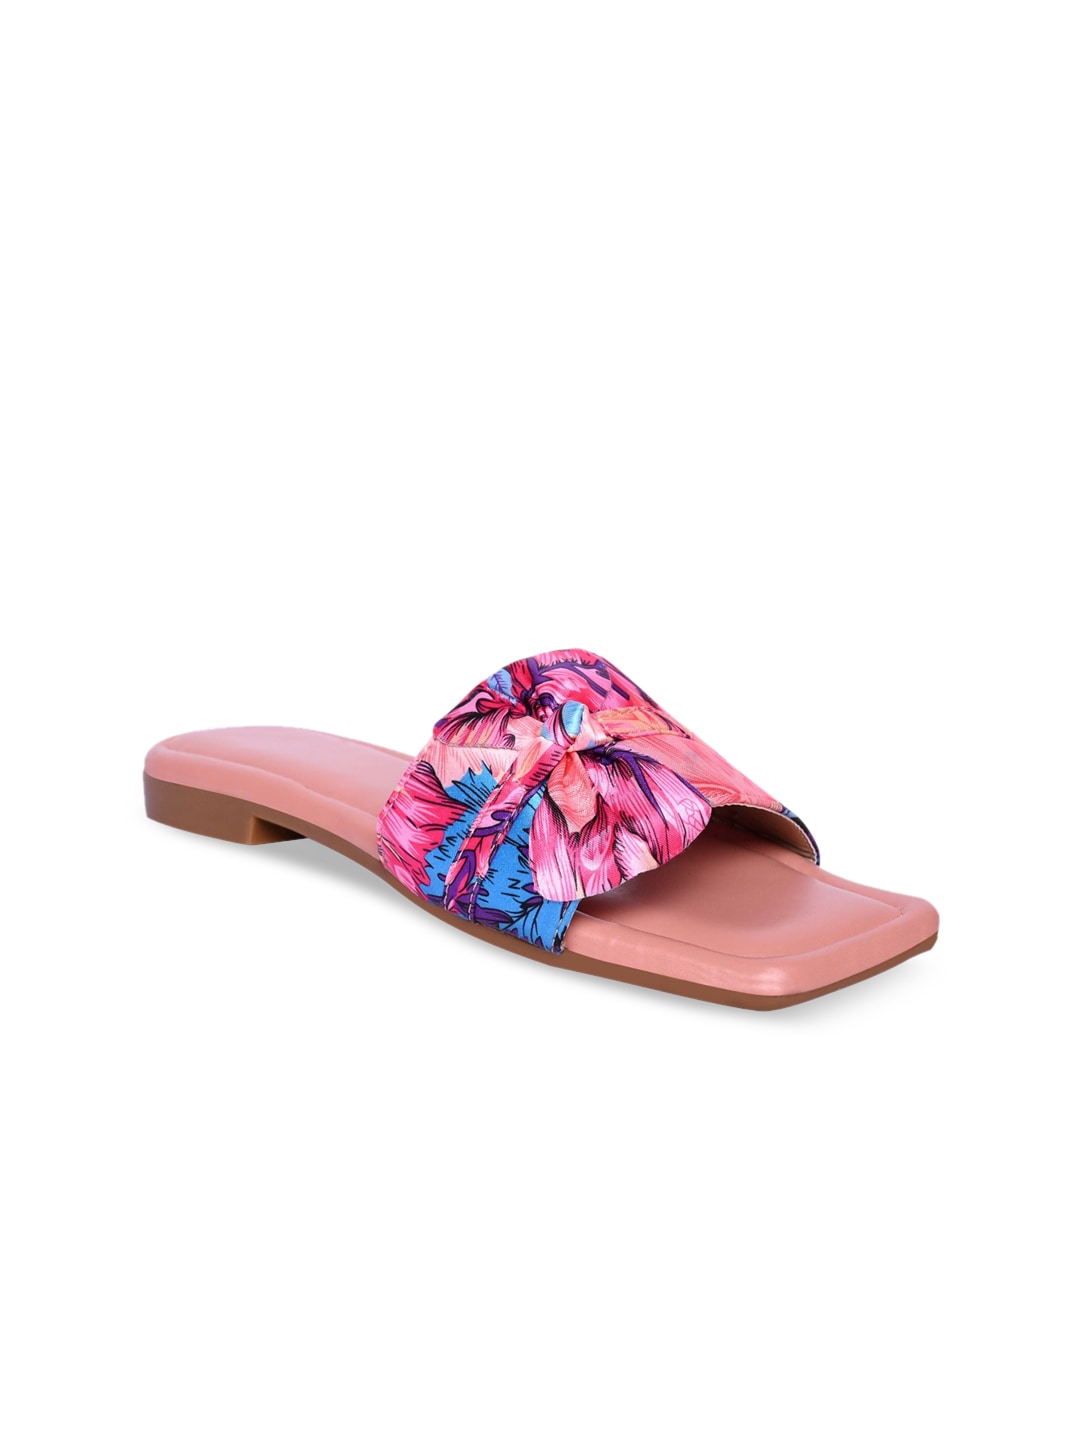 PERY PAO Women Printed Bows Open Toe Flats Price in India